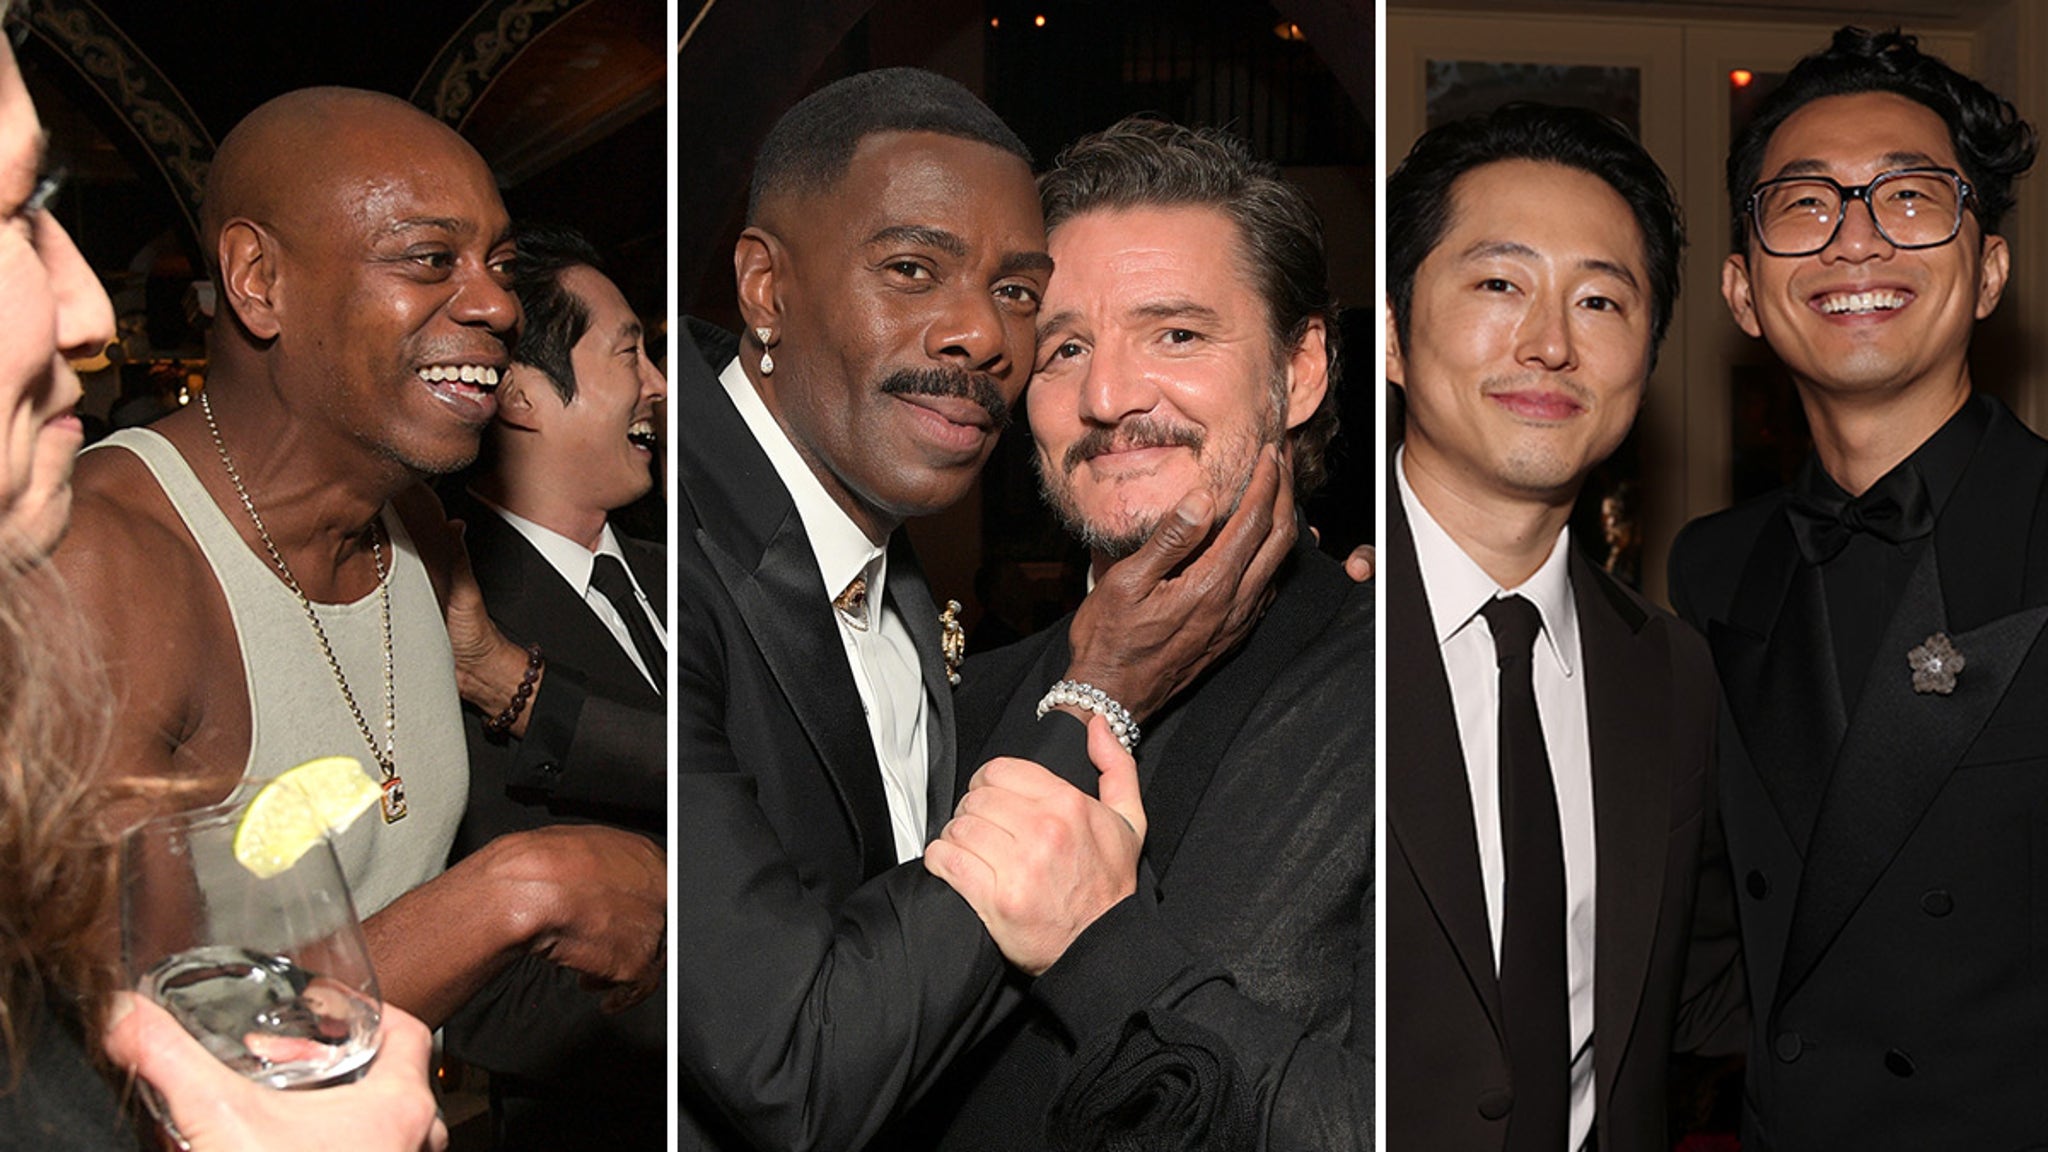 Hollywood’s Biggest Stars Look Ready to Celebrate at Emmys After-Parties